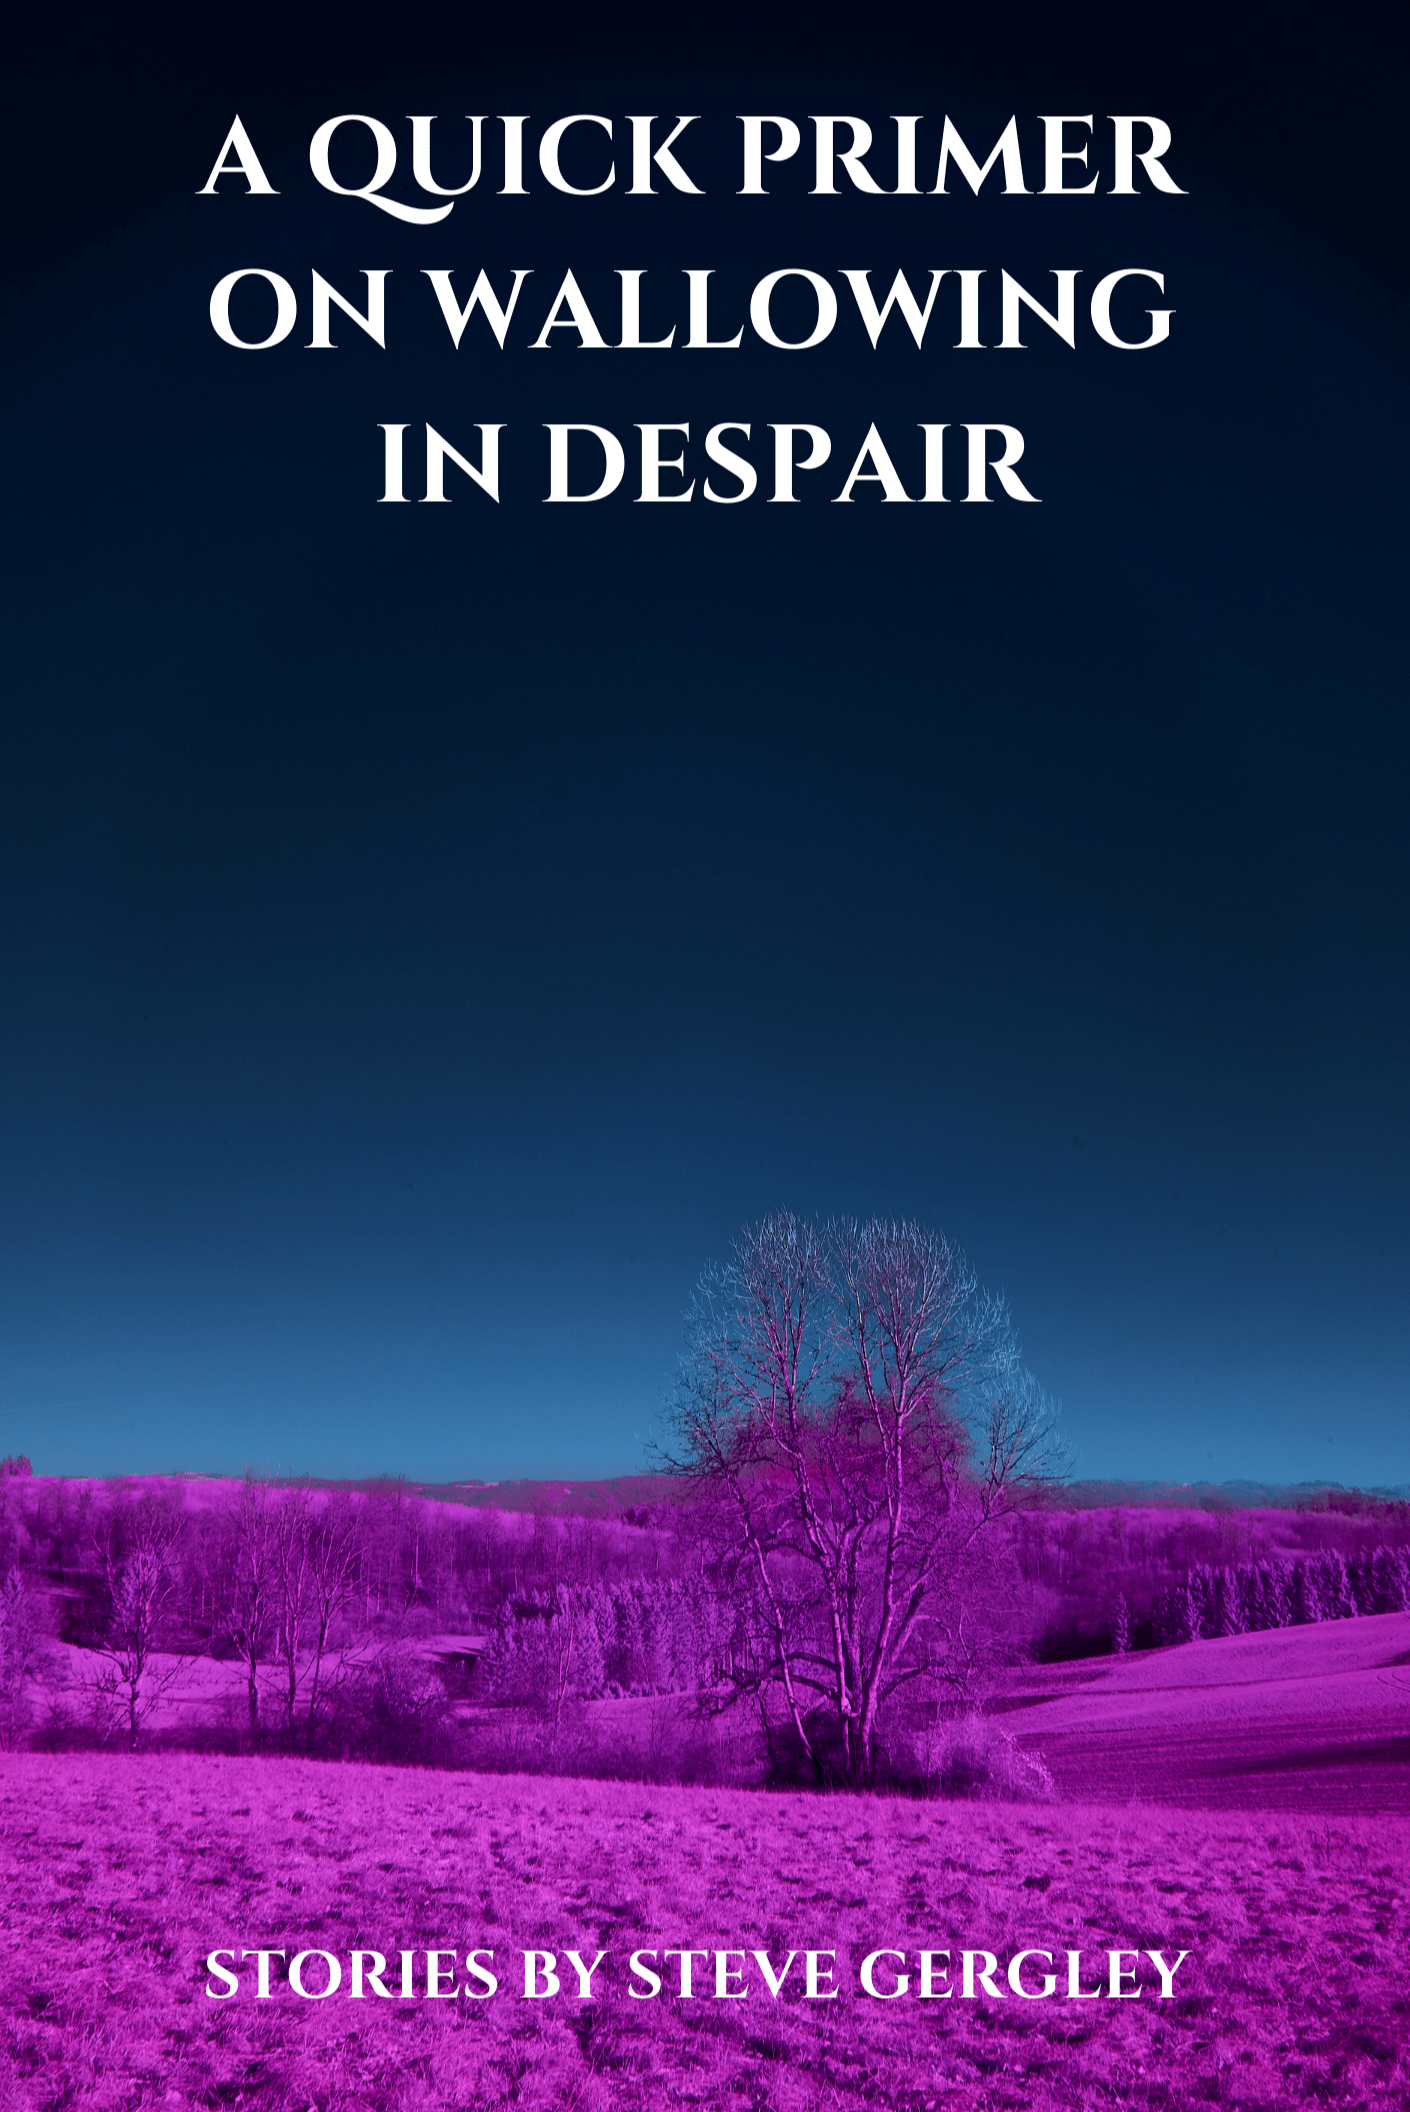 Book cover of A Quick Primer on Wallowing in Despair by Steve Gergley